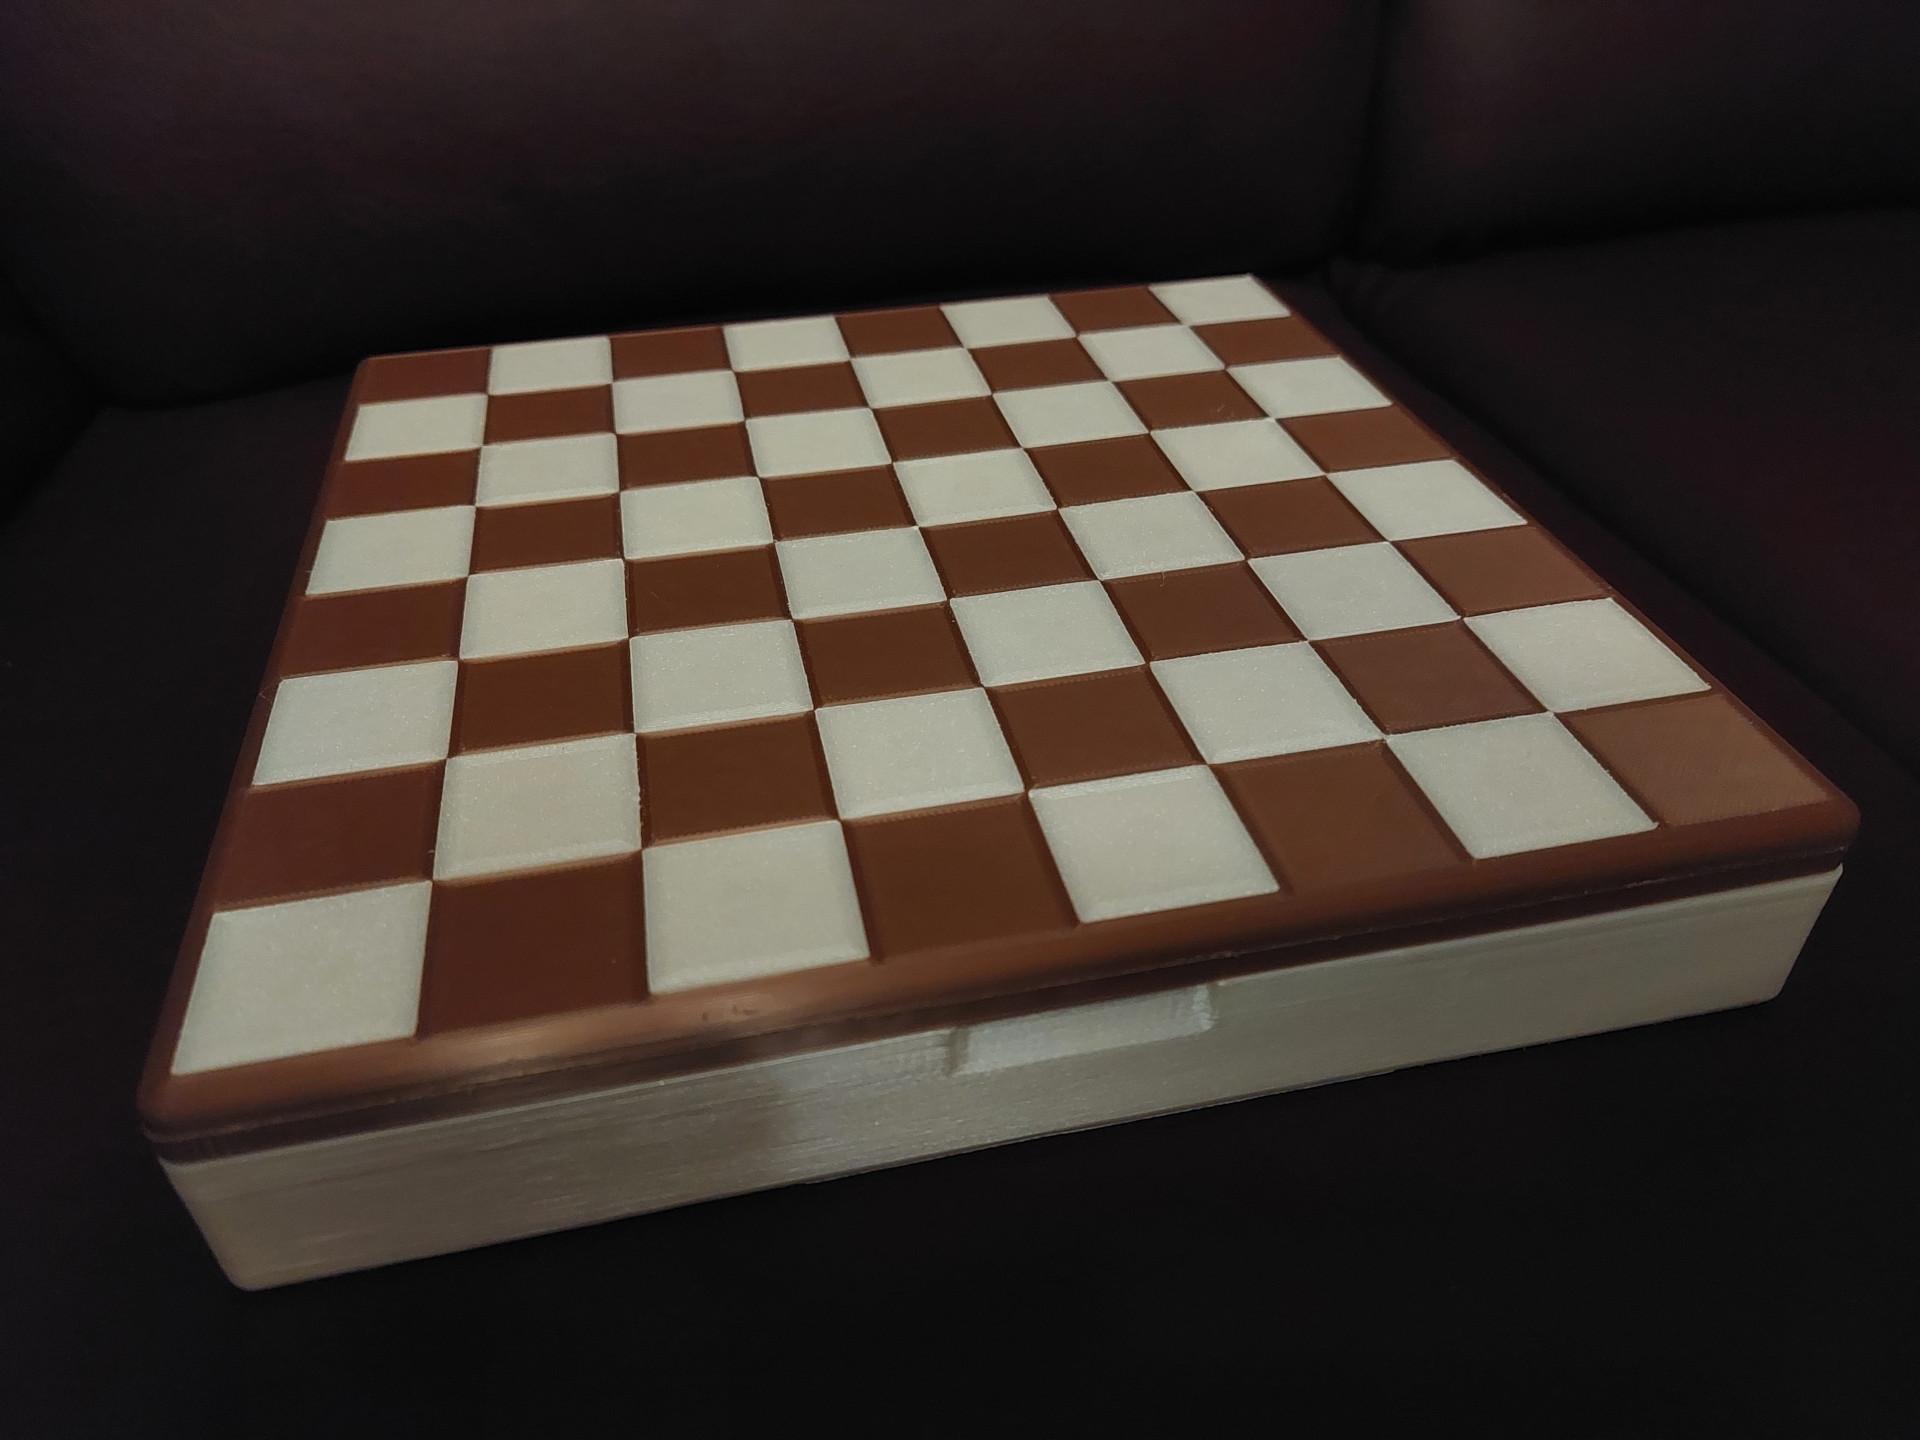 Chess & Checkers & 9 Men's Morris Board (with Storage Box) 3d model